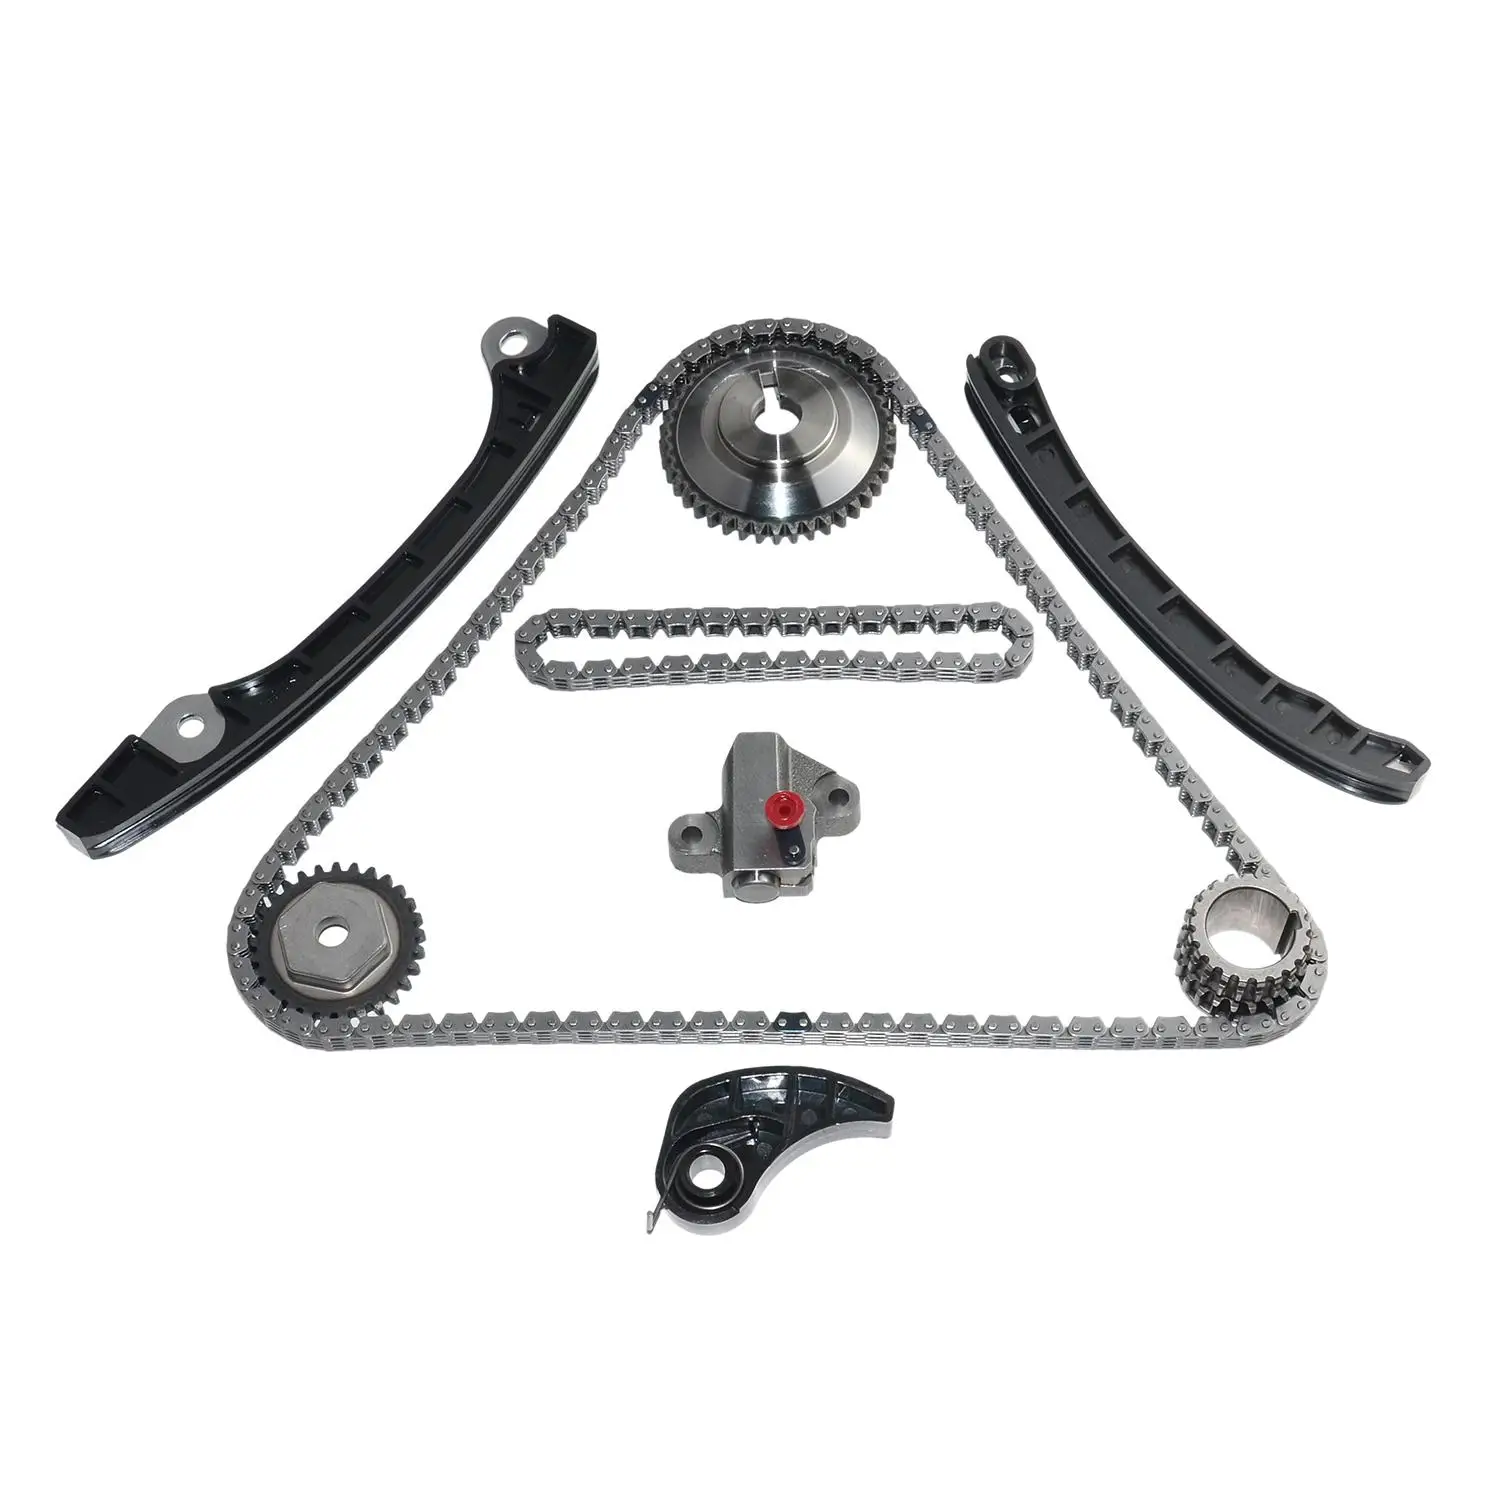 Clio IV Grandtour/Grand Scenic III,Scenic III/Grand Scenic IV,Scenic IV/Kadjar/Kangoo/Megane CC,for Smart Forfour 453/Smart Fortwo 451/453 Timing Chain kit Fit for Renault Captur/Clio IV 